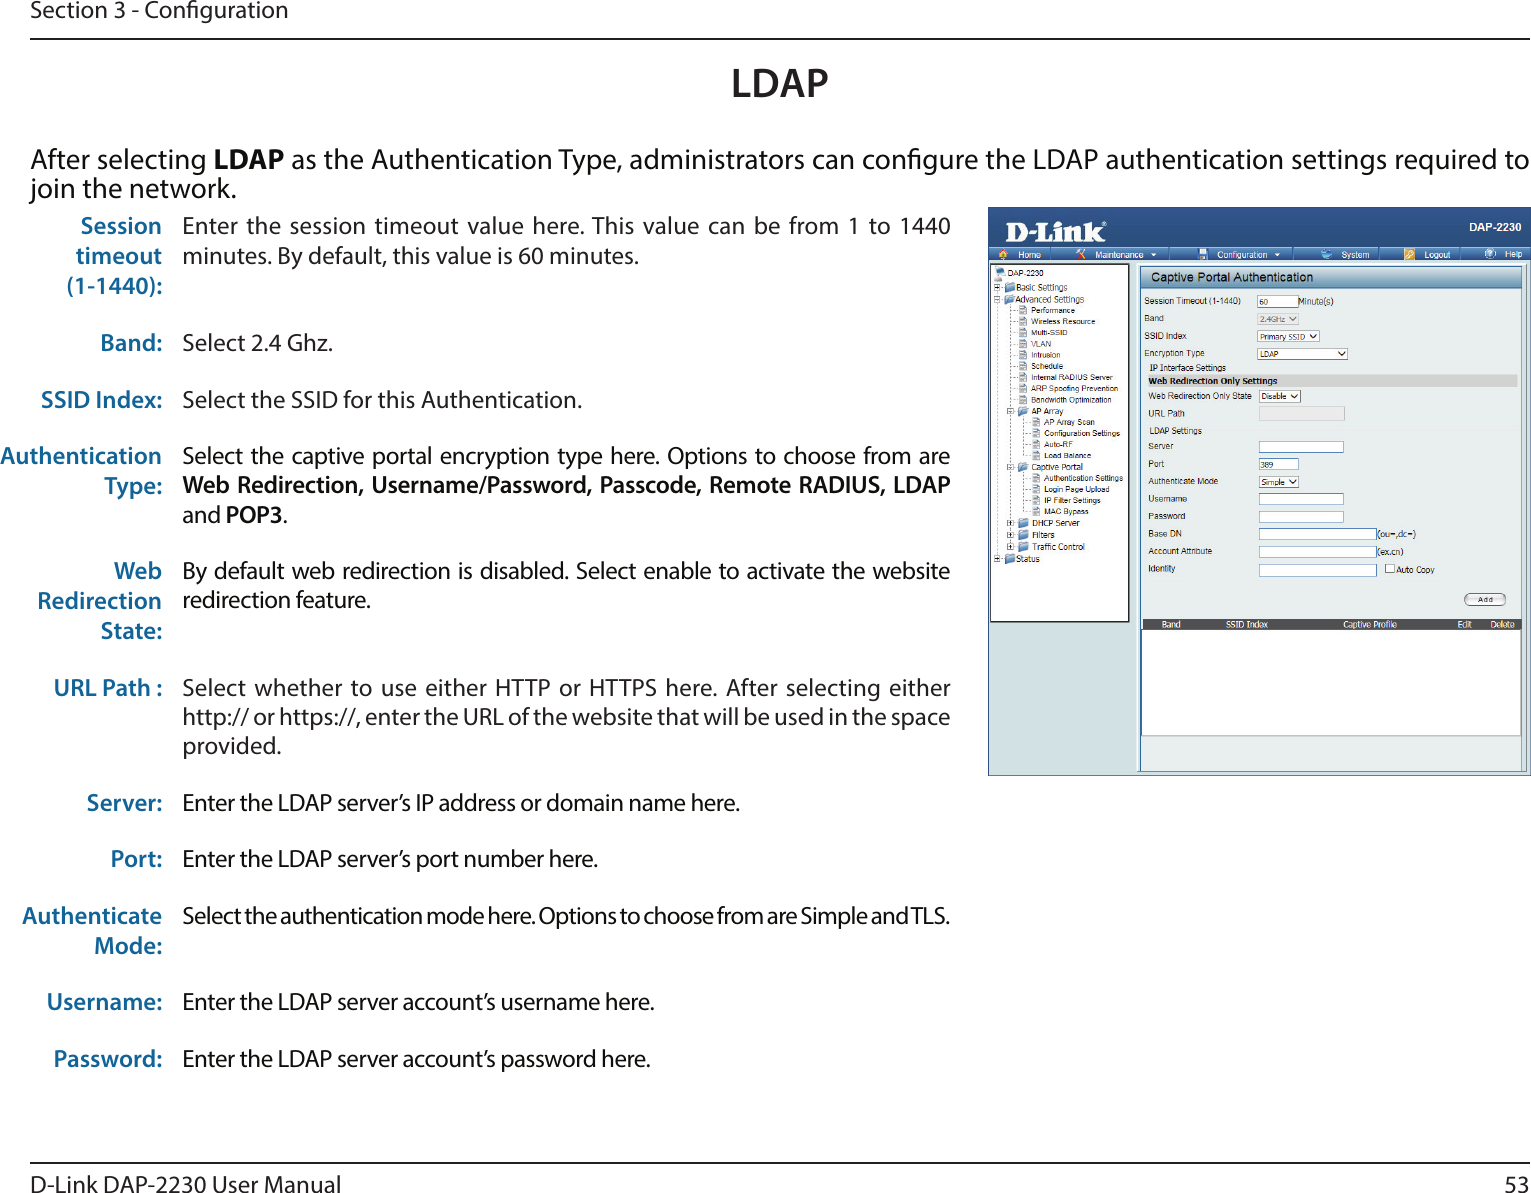 53D-Link DAP-2230 User ManualSection 3 - CongurationAfter selecting LDAP as the Authentication Type, administrators can congure the LDAP authentication settings required to join the network.Sessiontimeout(1-1440):Enter the session timeout value here. This value can be from 1 to 1440 minutes. By default, this value is 60 minutes.Band: Select 2.4 Ghz.SSID Index: Select the SSID for this Authentication.Authentication Type: Select the captive portal encryption type here. Options to choose from are Web Redirection, Username/Password, Passcode, Remote RADIUS, LDAP and POP3. WebRedirection State: By default web redirection is disabled. Select enable to activate the website redirection feature.URL Path :  Select whether to use either HTTP or HTTPS here. After selecting either http:// or https://, enter the URL of the website that will be used in the space provided.Server: Enter the LDAP server’s IP address or domain name here.Port: Enter the LDAP server’s port number here.Authenticate Mode:Select the authentication mode here. Options to choose from are Simple and TLS.Username: Enter the LDAP server account’s username here.Password: Enter the LDAP server account’s password here.LDAP